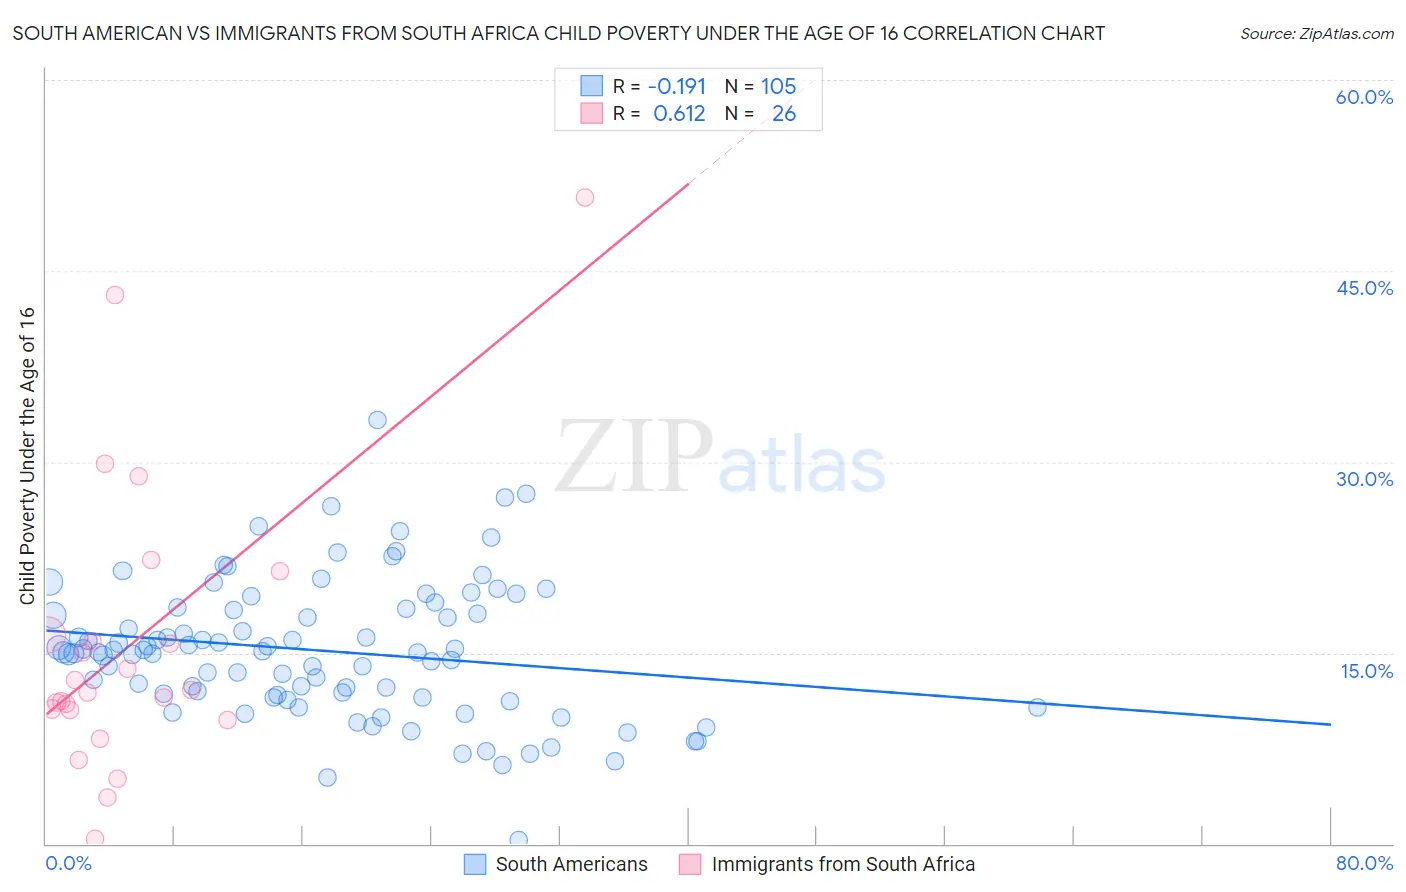 South American vs Immigrants from South Africa Child Poverty Under the Age of 16